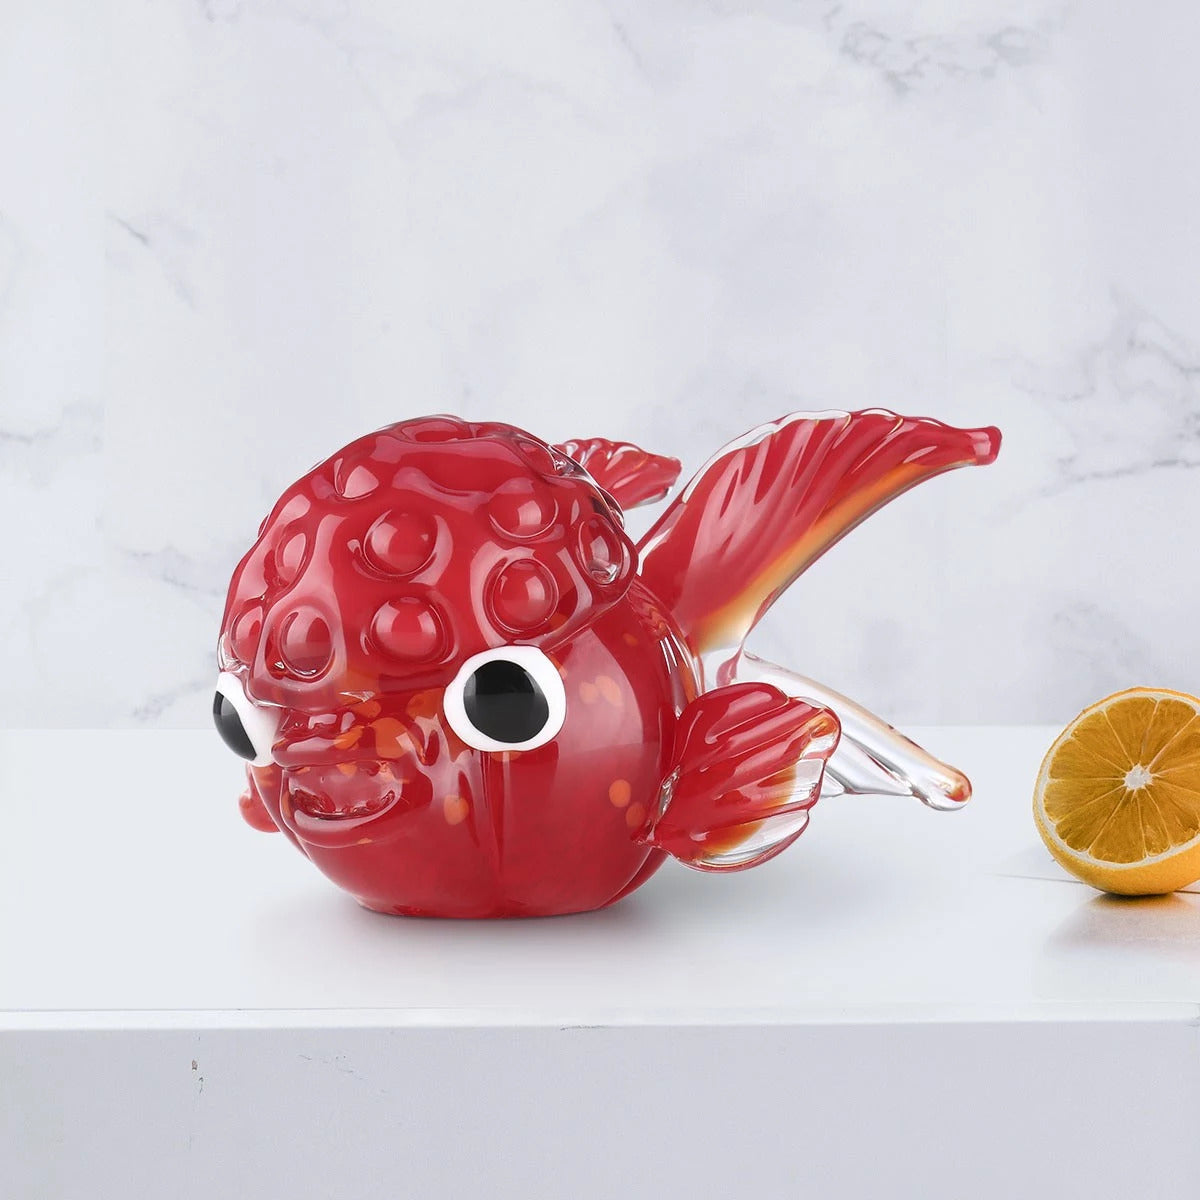 Aquarium Decor and Fish Tank Ornaments with Red Lionfish